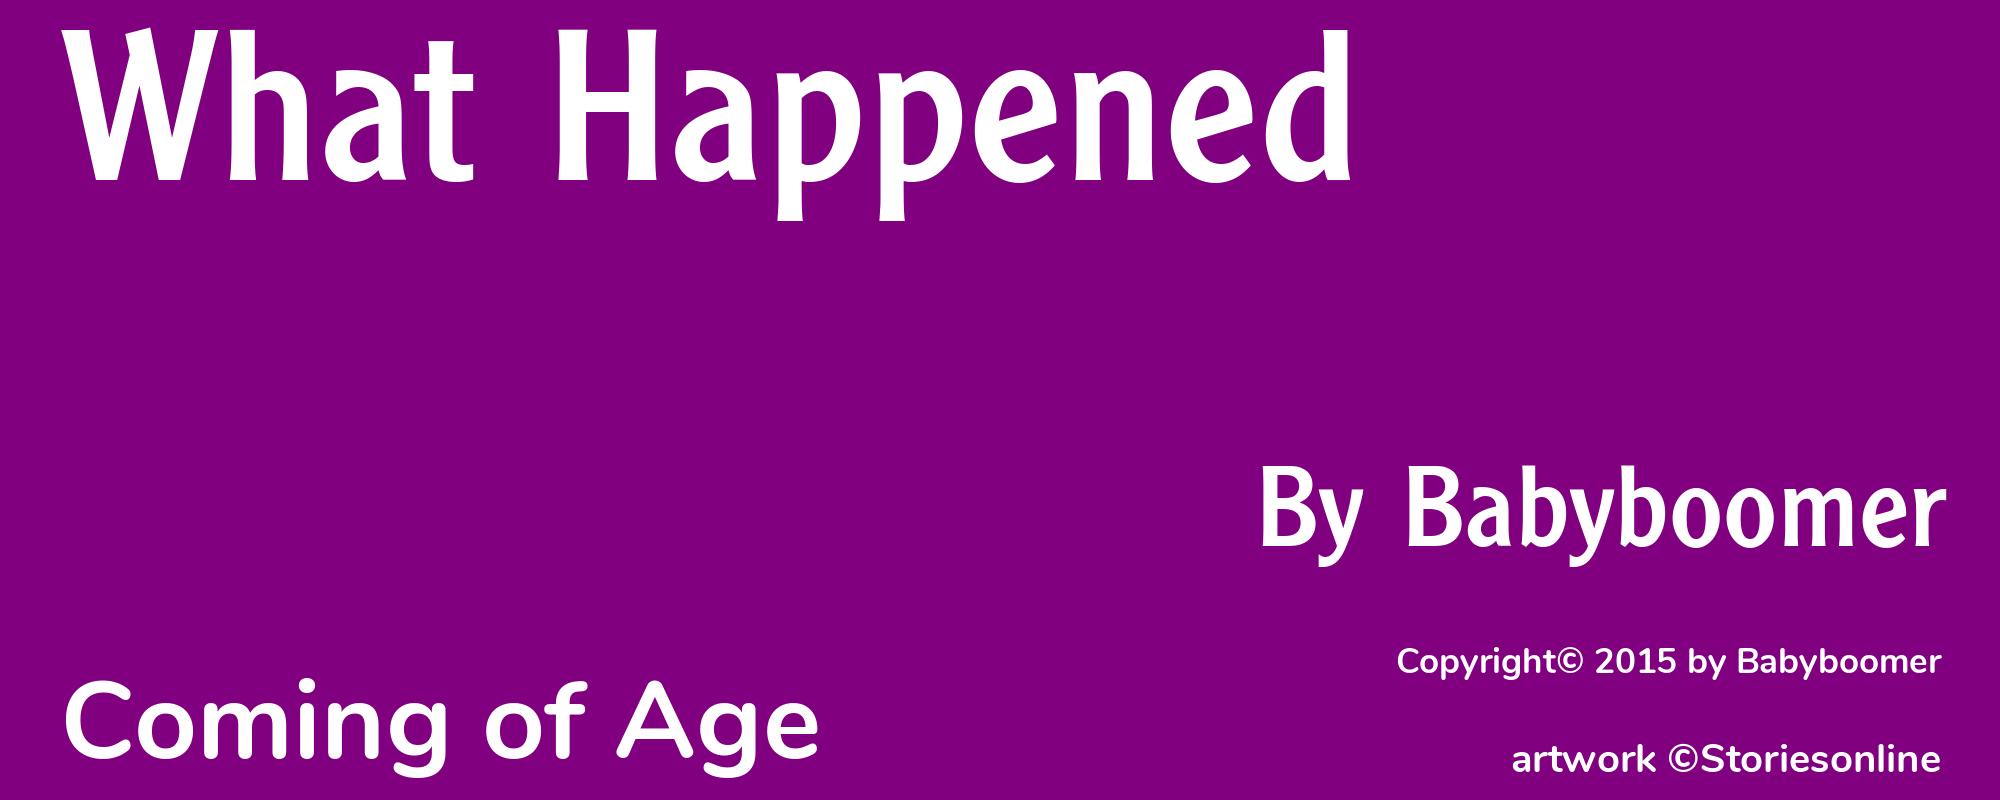 What Happened - Cover